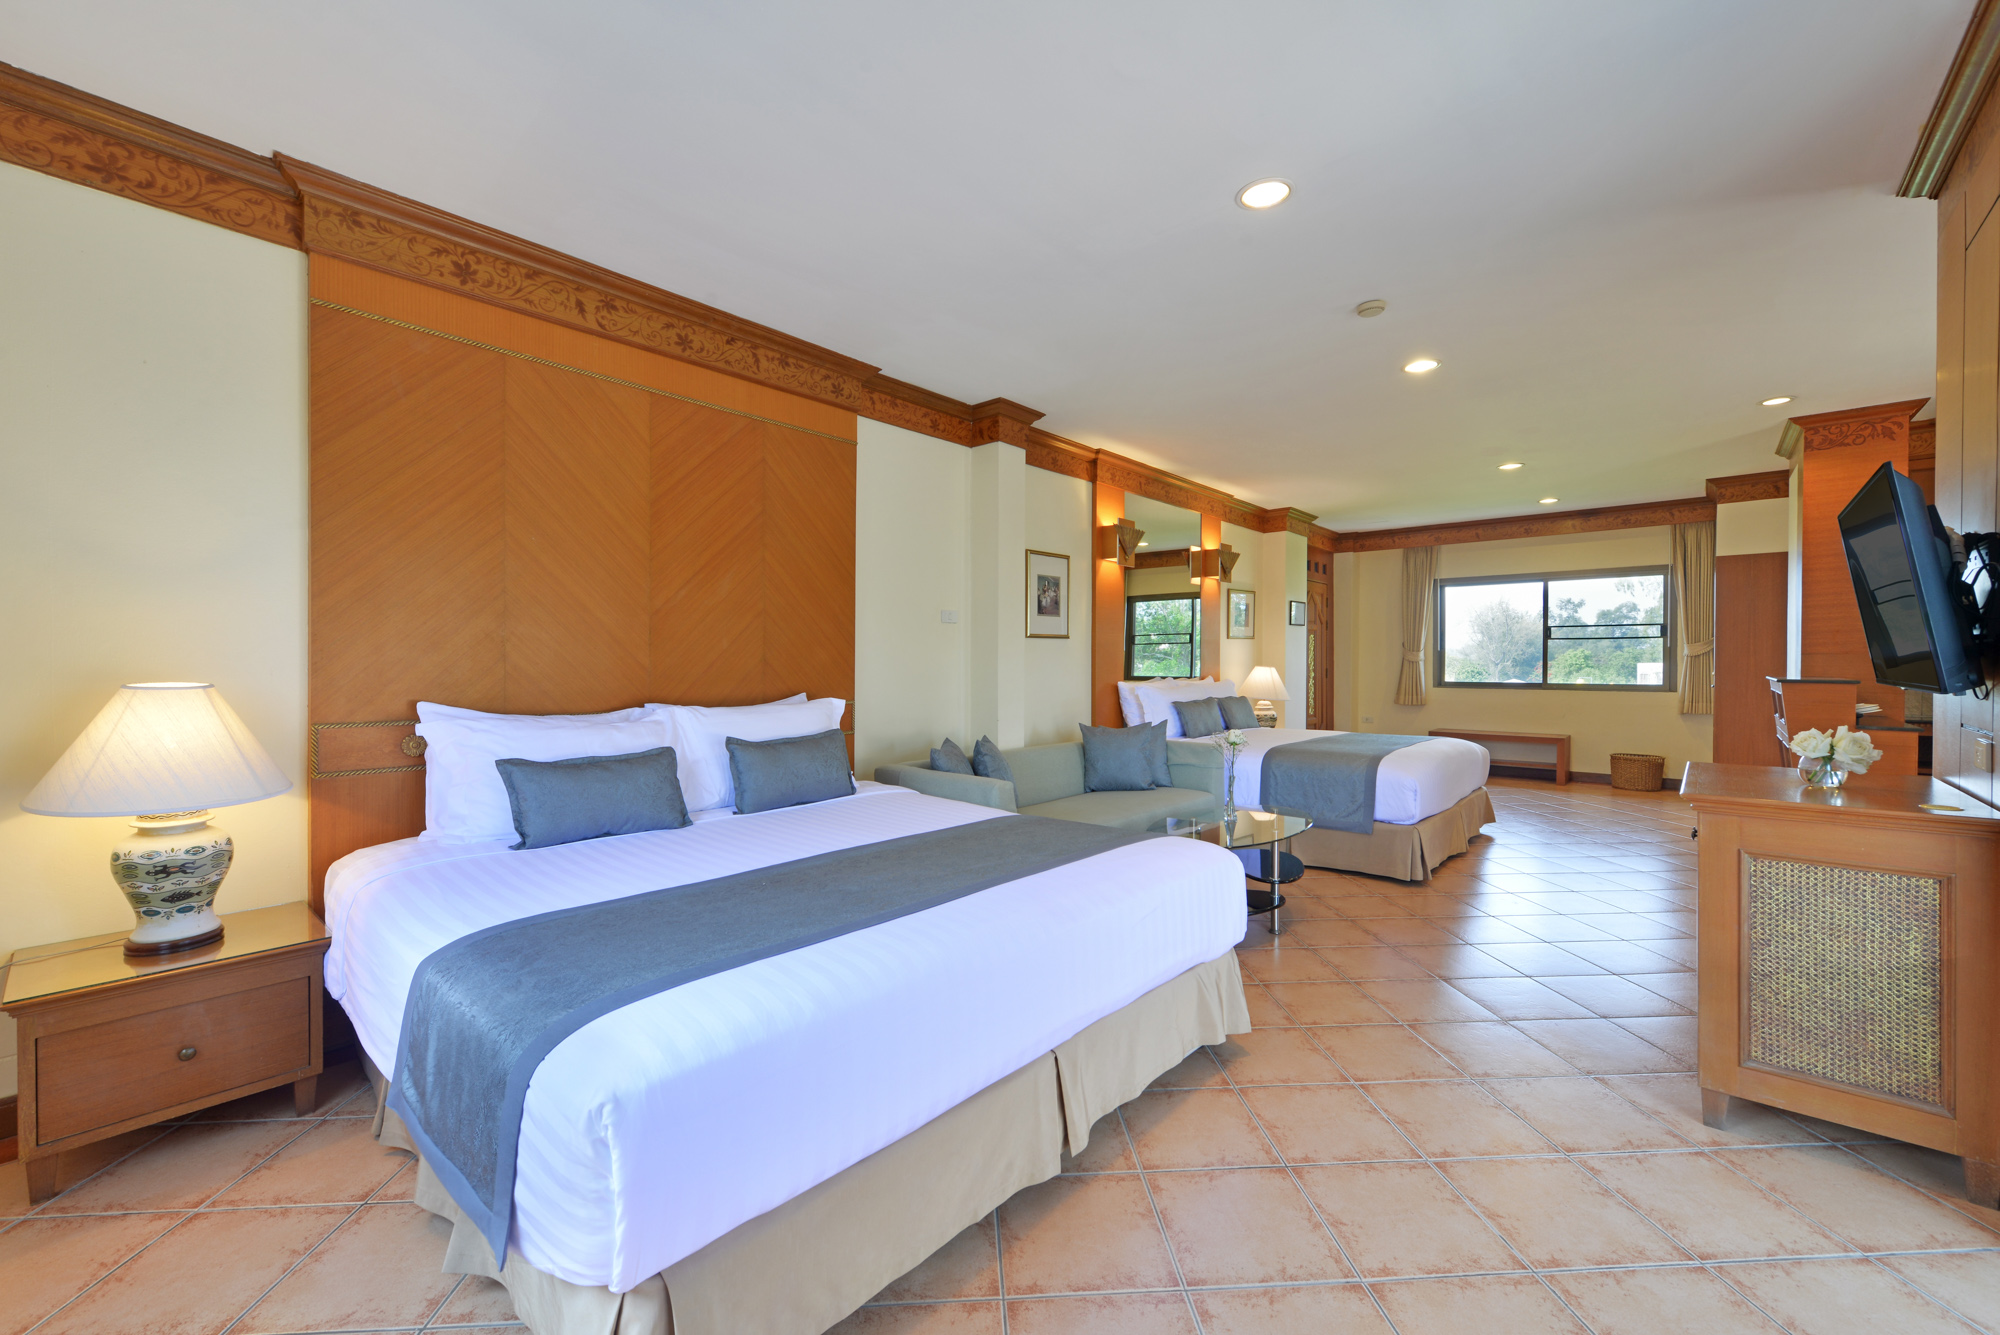 Anantasila offers a variety of Family suites which are ideal for small families or long term guests. All have full cooking facilities and living areas. Larger than our standard rooms, the Family suites provide extra comfort and versatility.